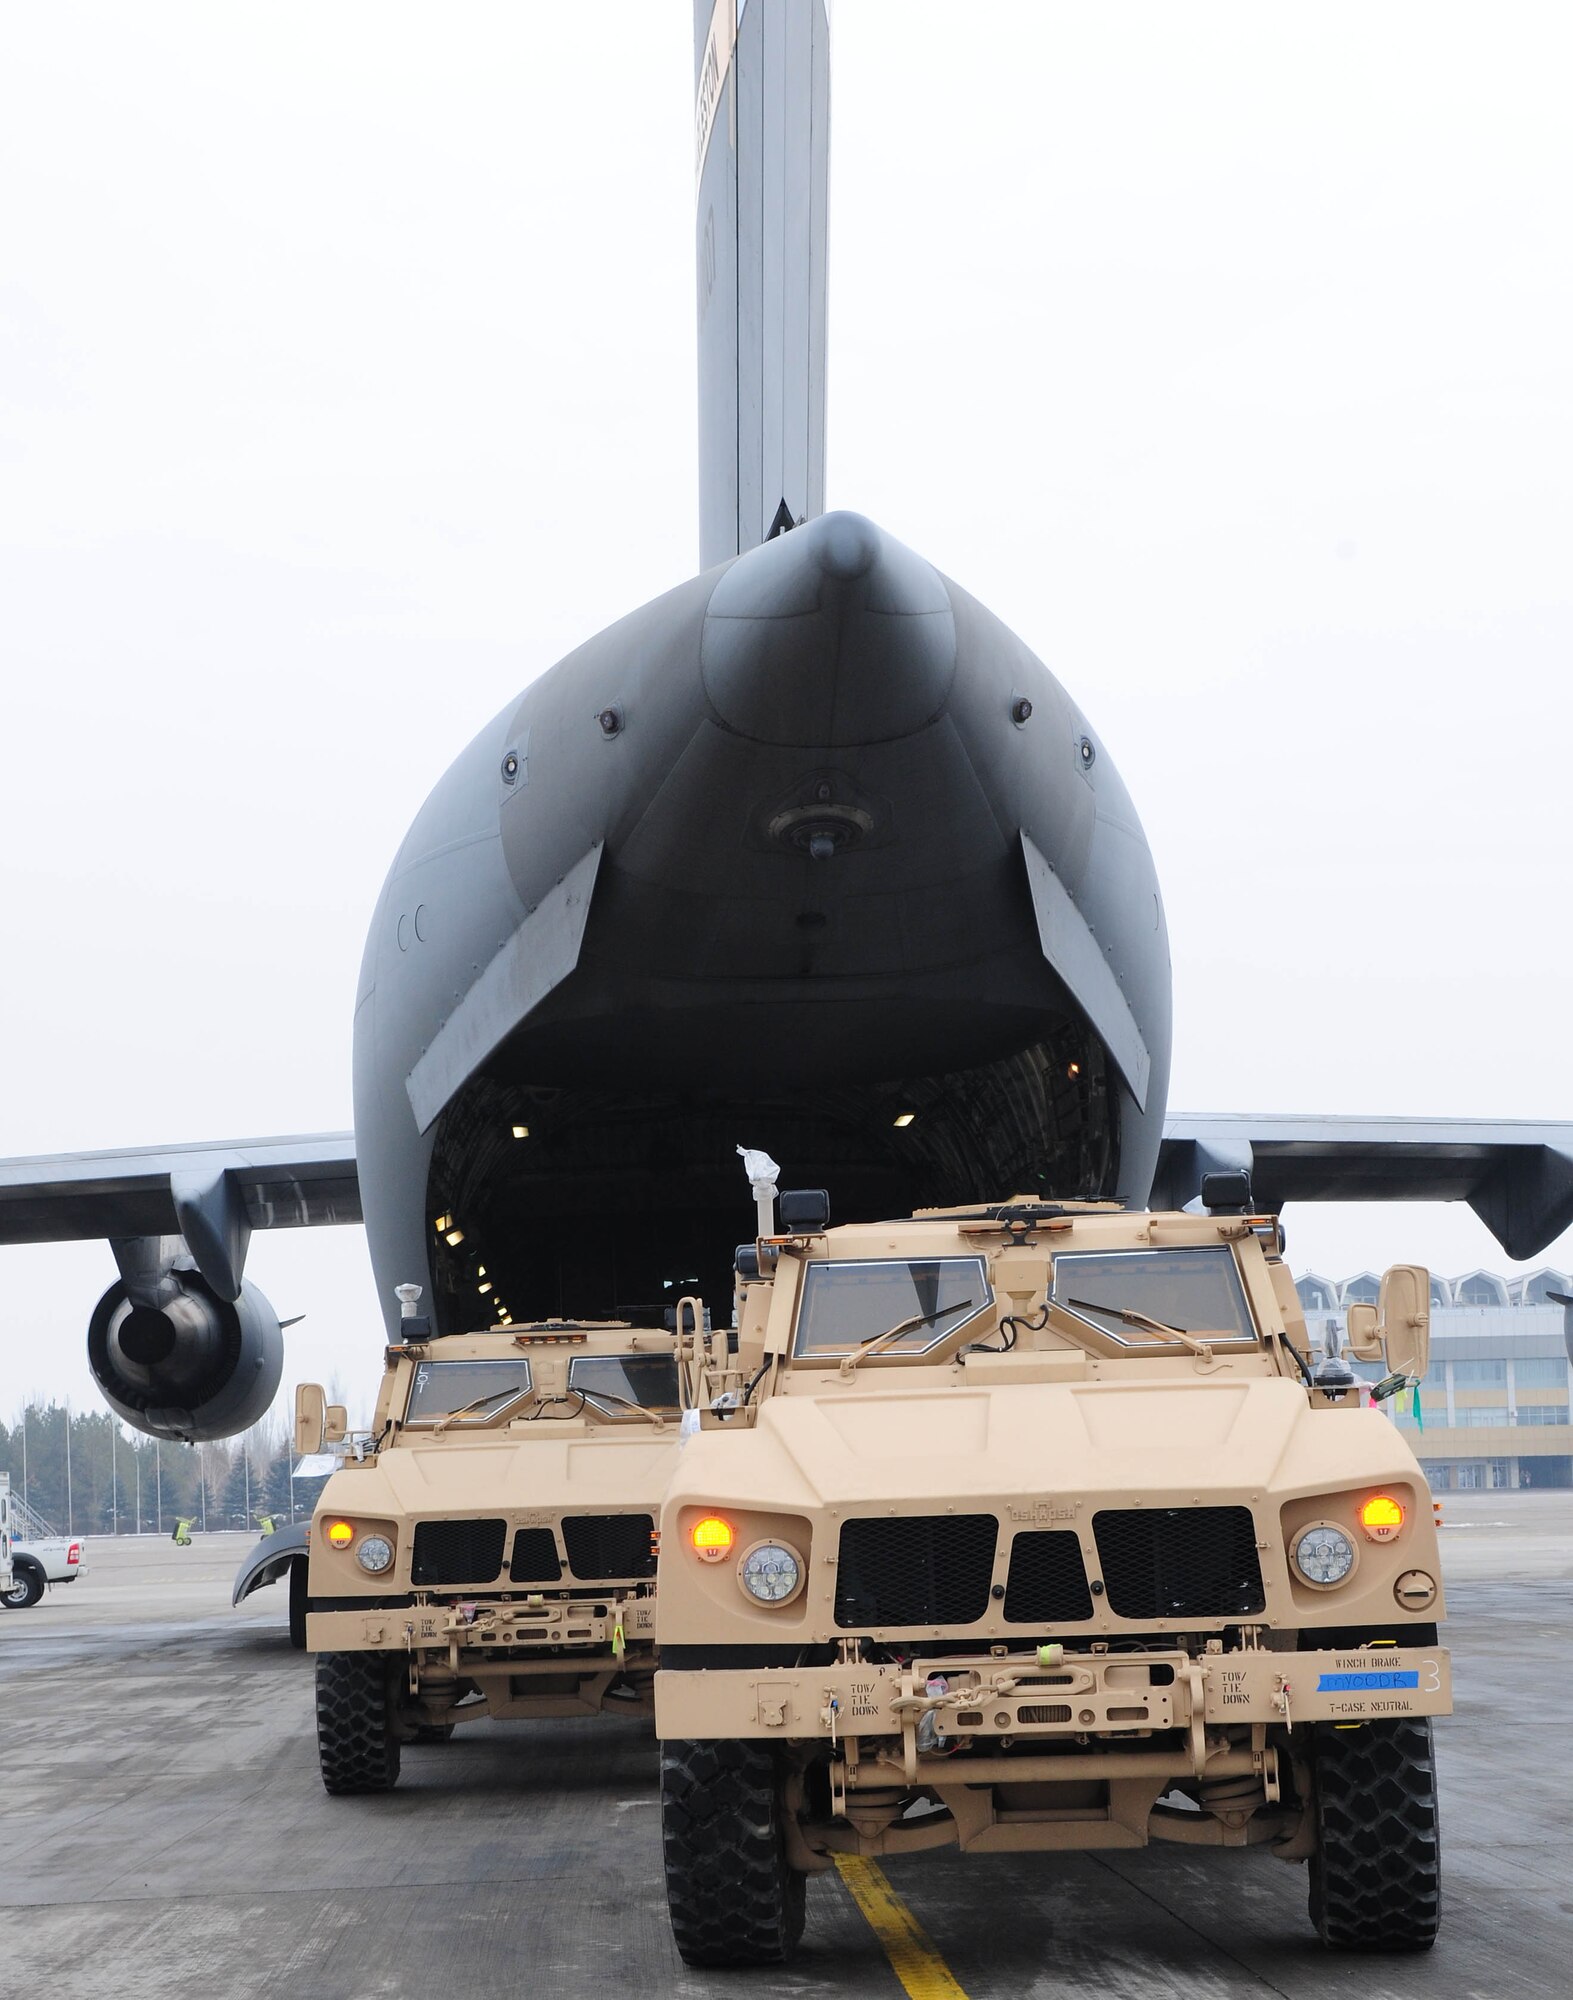 TRANSIT CENTER AT MANAS, Kyrgyzstan - Several MRAP-all terrain vehicles are loaded into a C-17 Globemaster III prior to shipment to Afghanistan. Several C-17s provide airlift for military servicemembers and cargo. (U.S. Air Force photo by Senior Airman Nichelle Anderson)